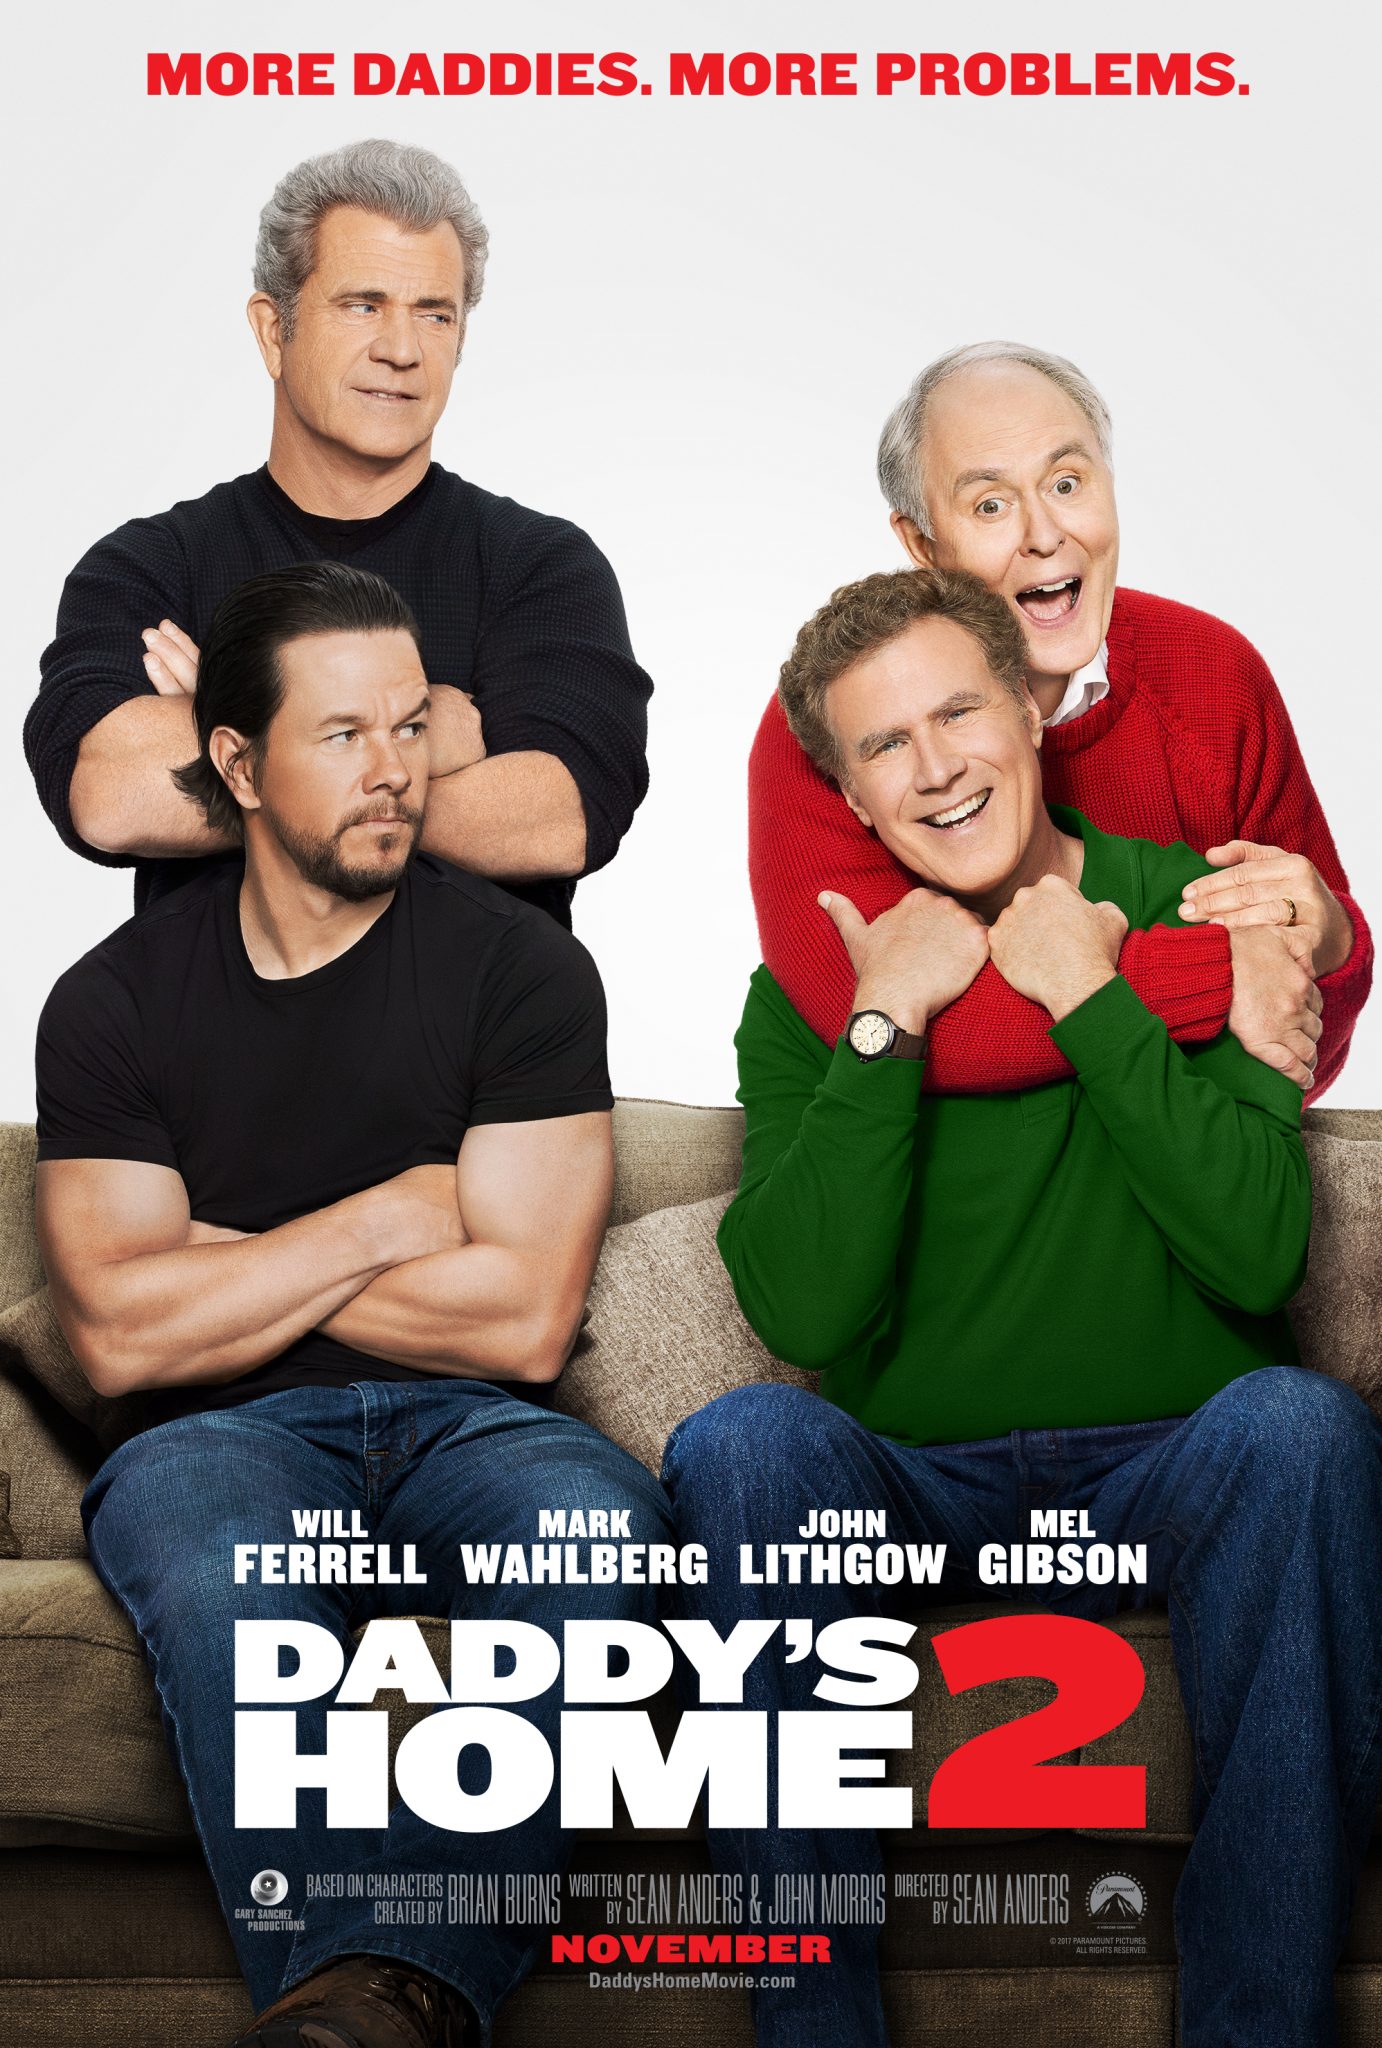 New Movie: Daddy’s Home 2